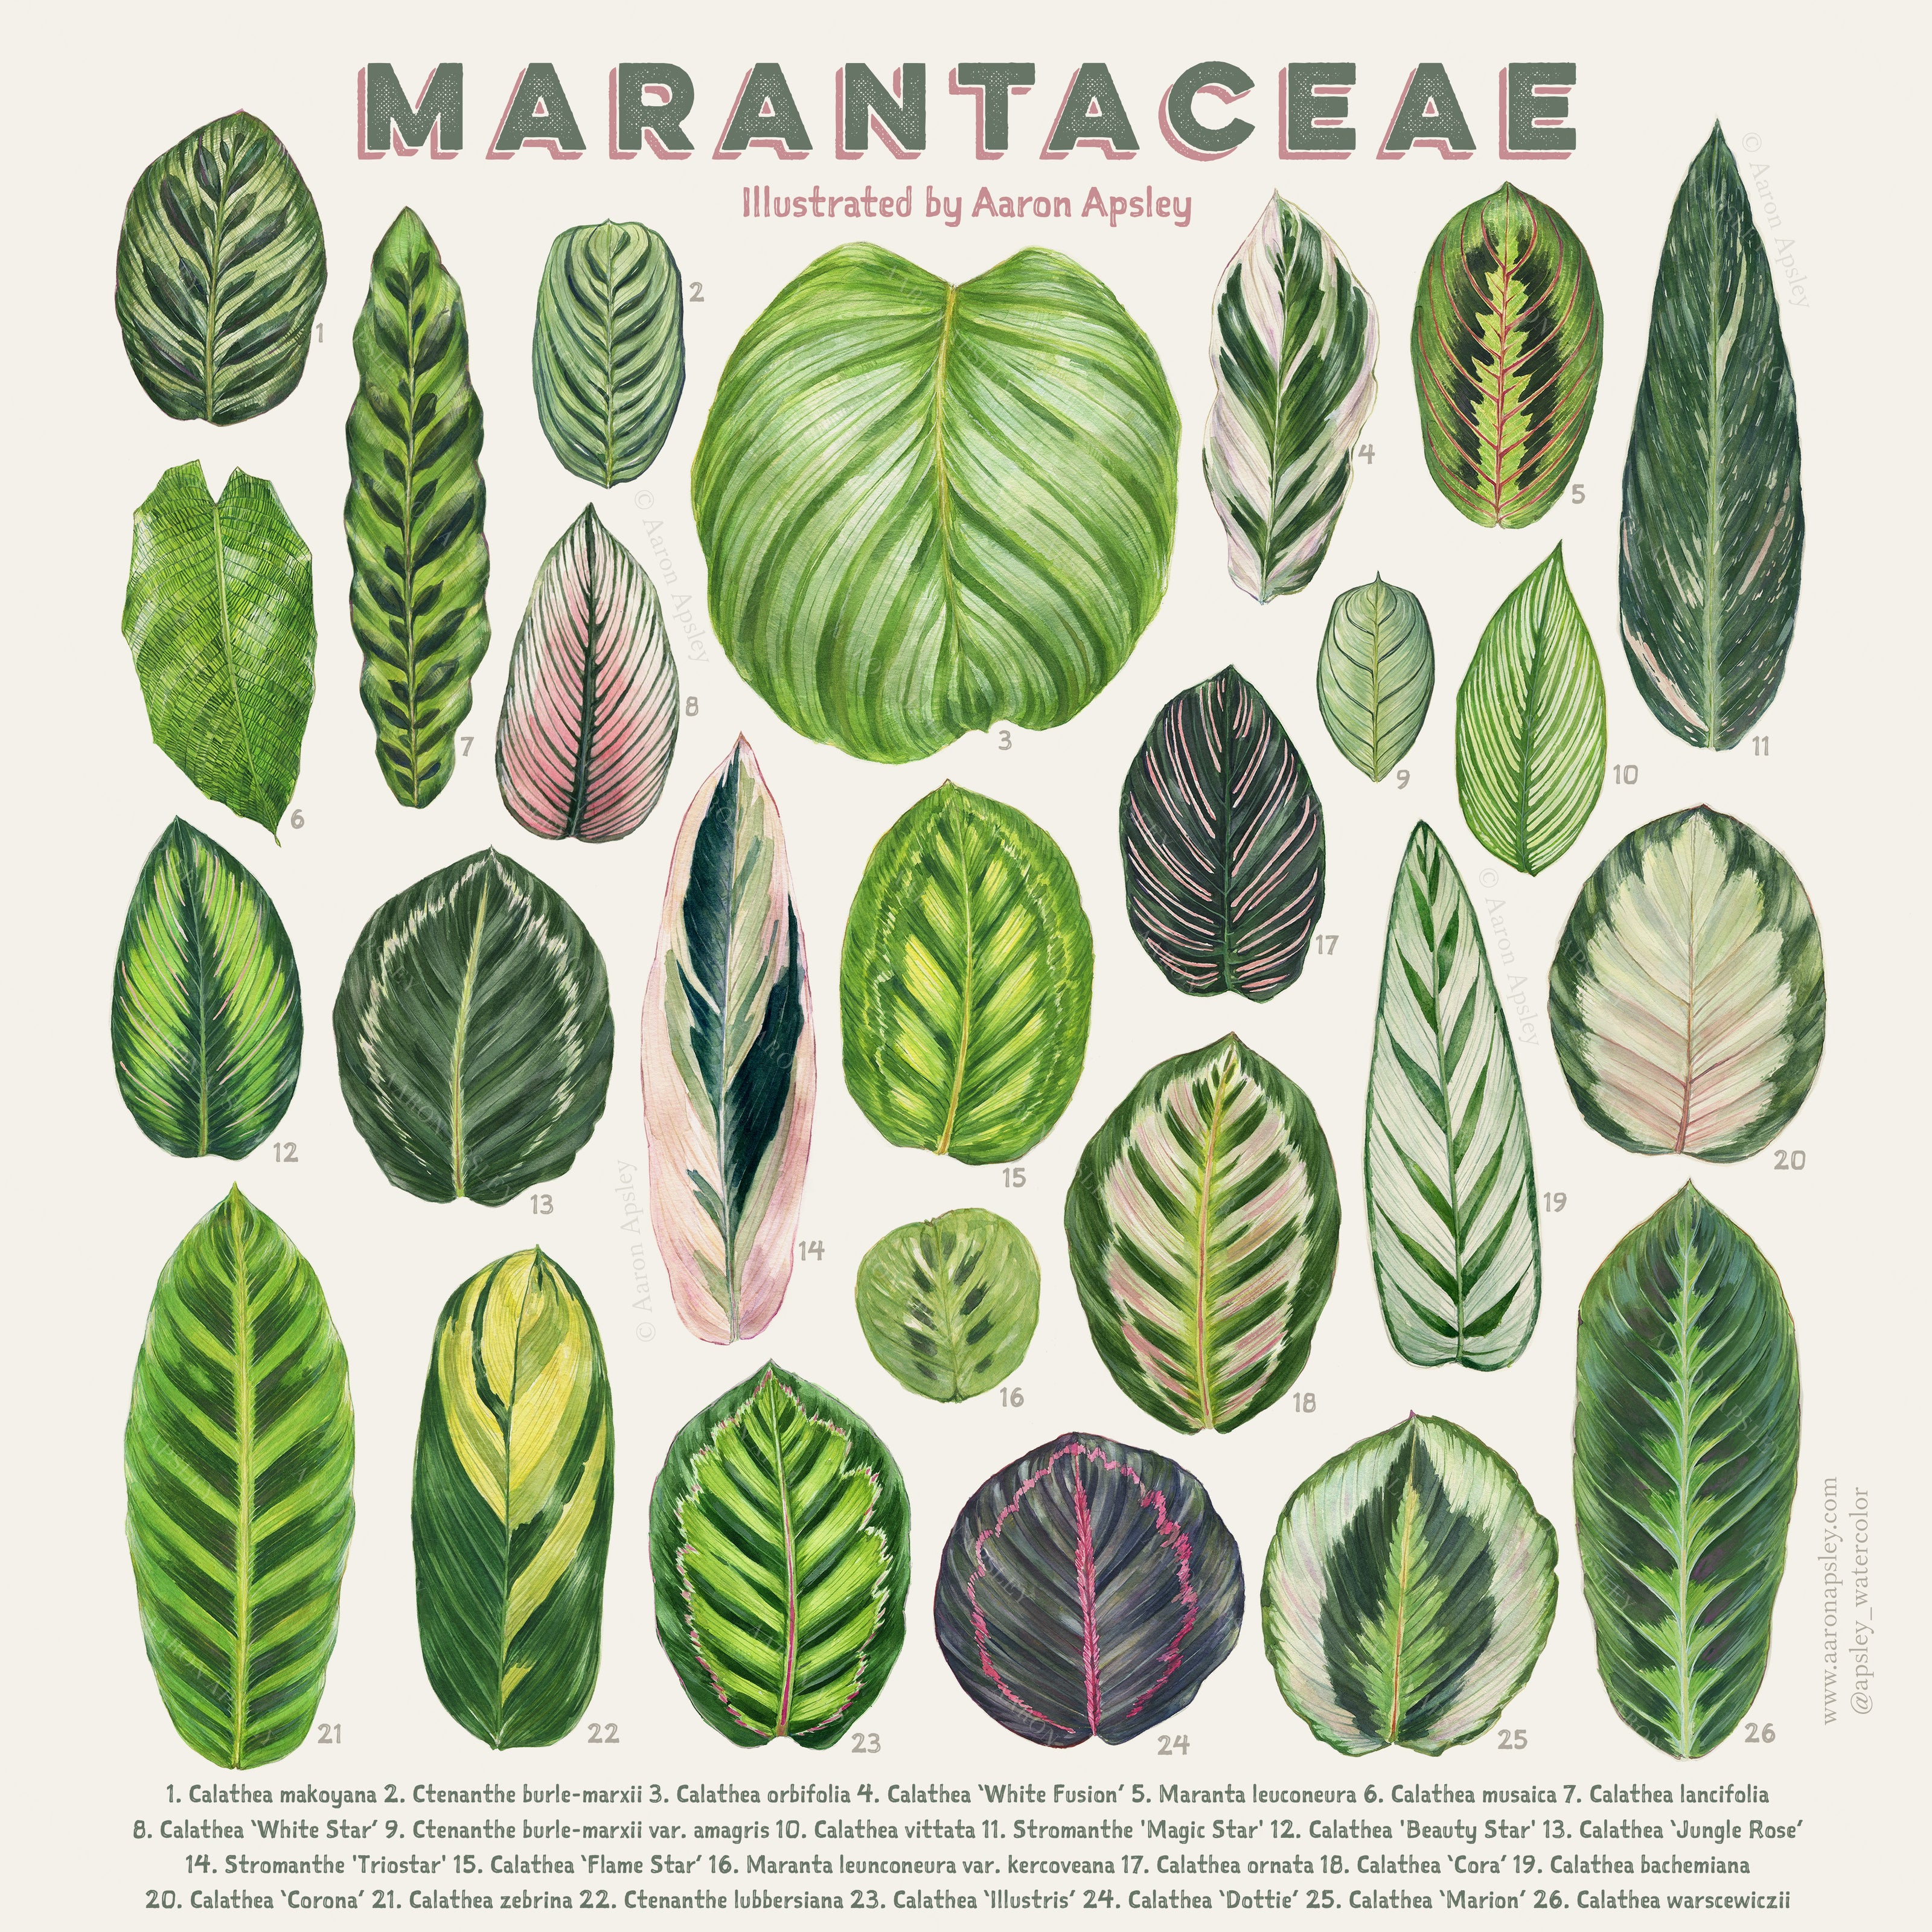 An identification guide or ID chart showing different varieties of popular Calathea( Goeppertia), Stromanthe, Maranta and other prayer plant houseplants. 